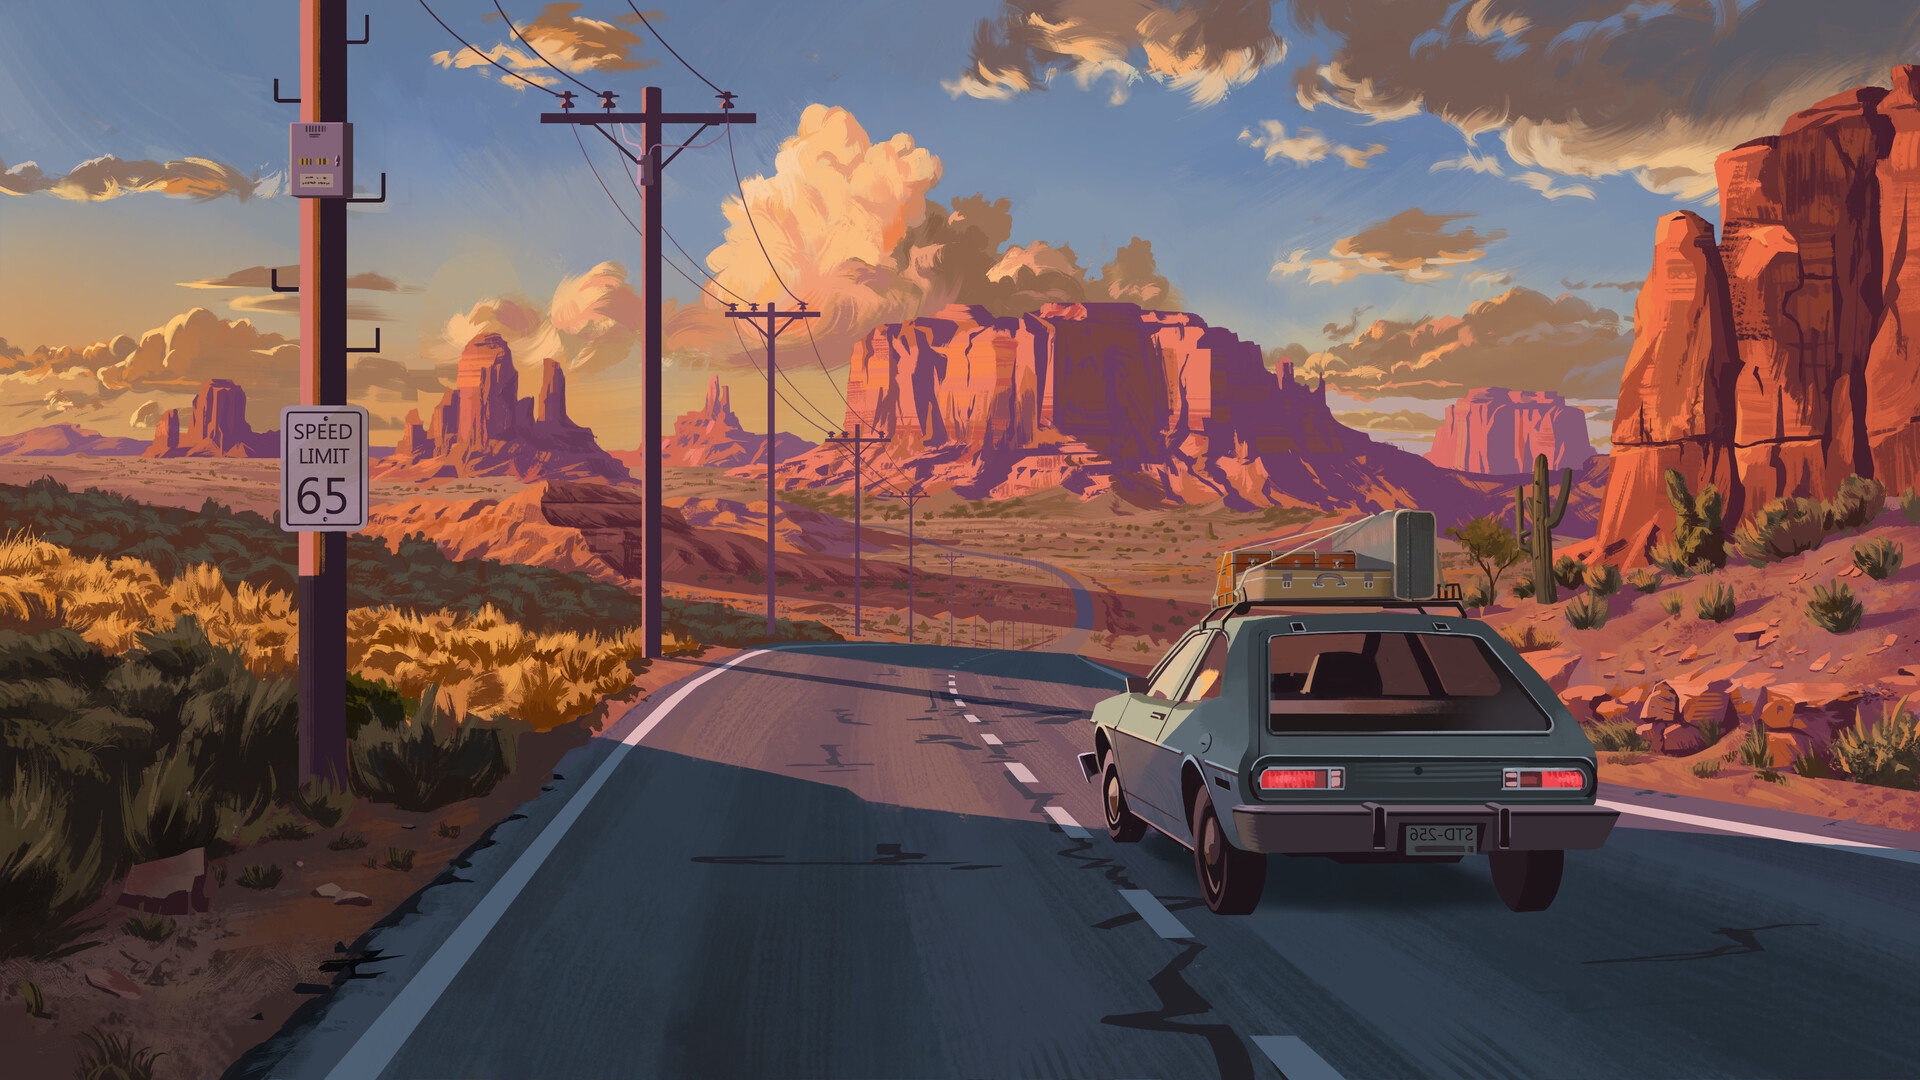 General 1920x1080 digital art illusion sunset car sky peaceful road sign roadtrip rear view taillights licence plates nature clouds road vehicle sunlight canyon sign cactus driving landscape Jonathan Lebrec numbers